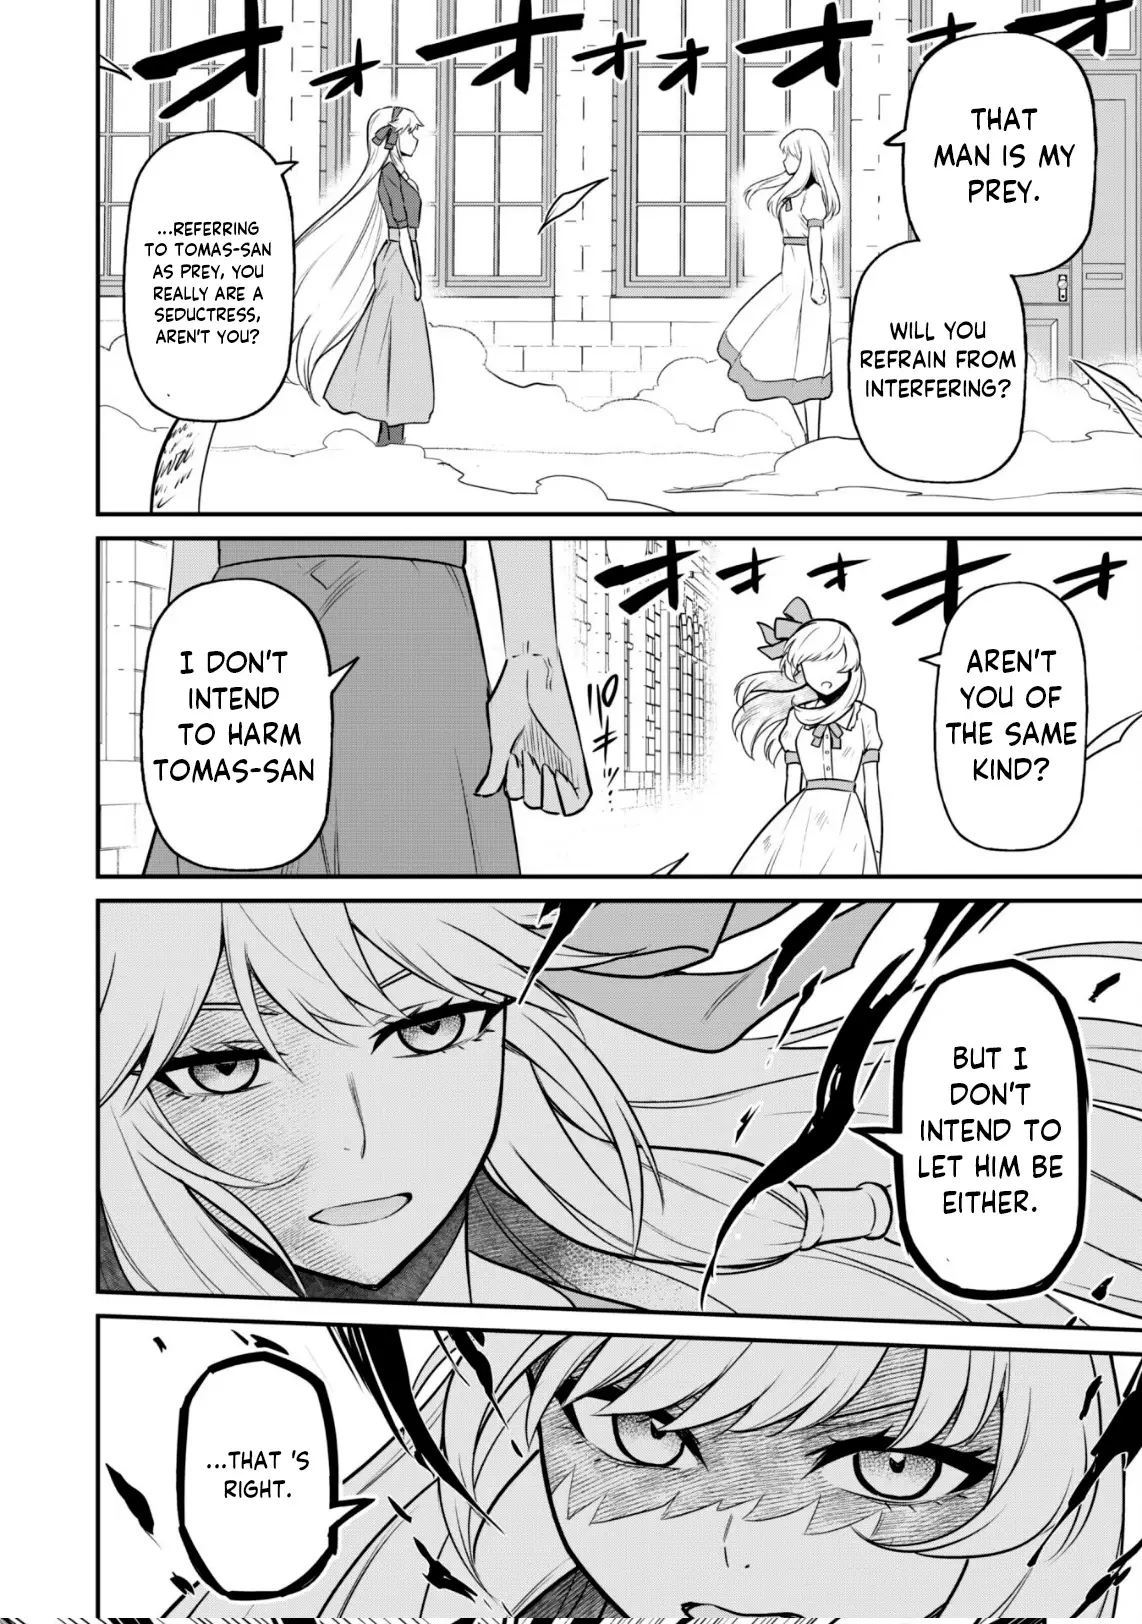 The White Mage Who Joined My Party Is A Circle Crusher, So My Isekai Life Is At Risk Of Collapsing Once Again - 5.2 page 16-29dddb4c